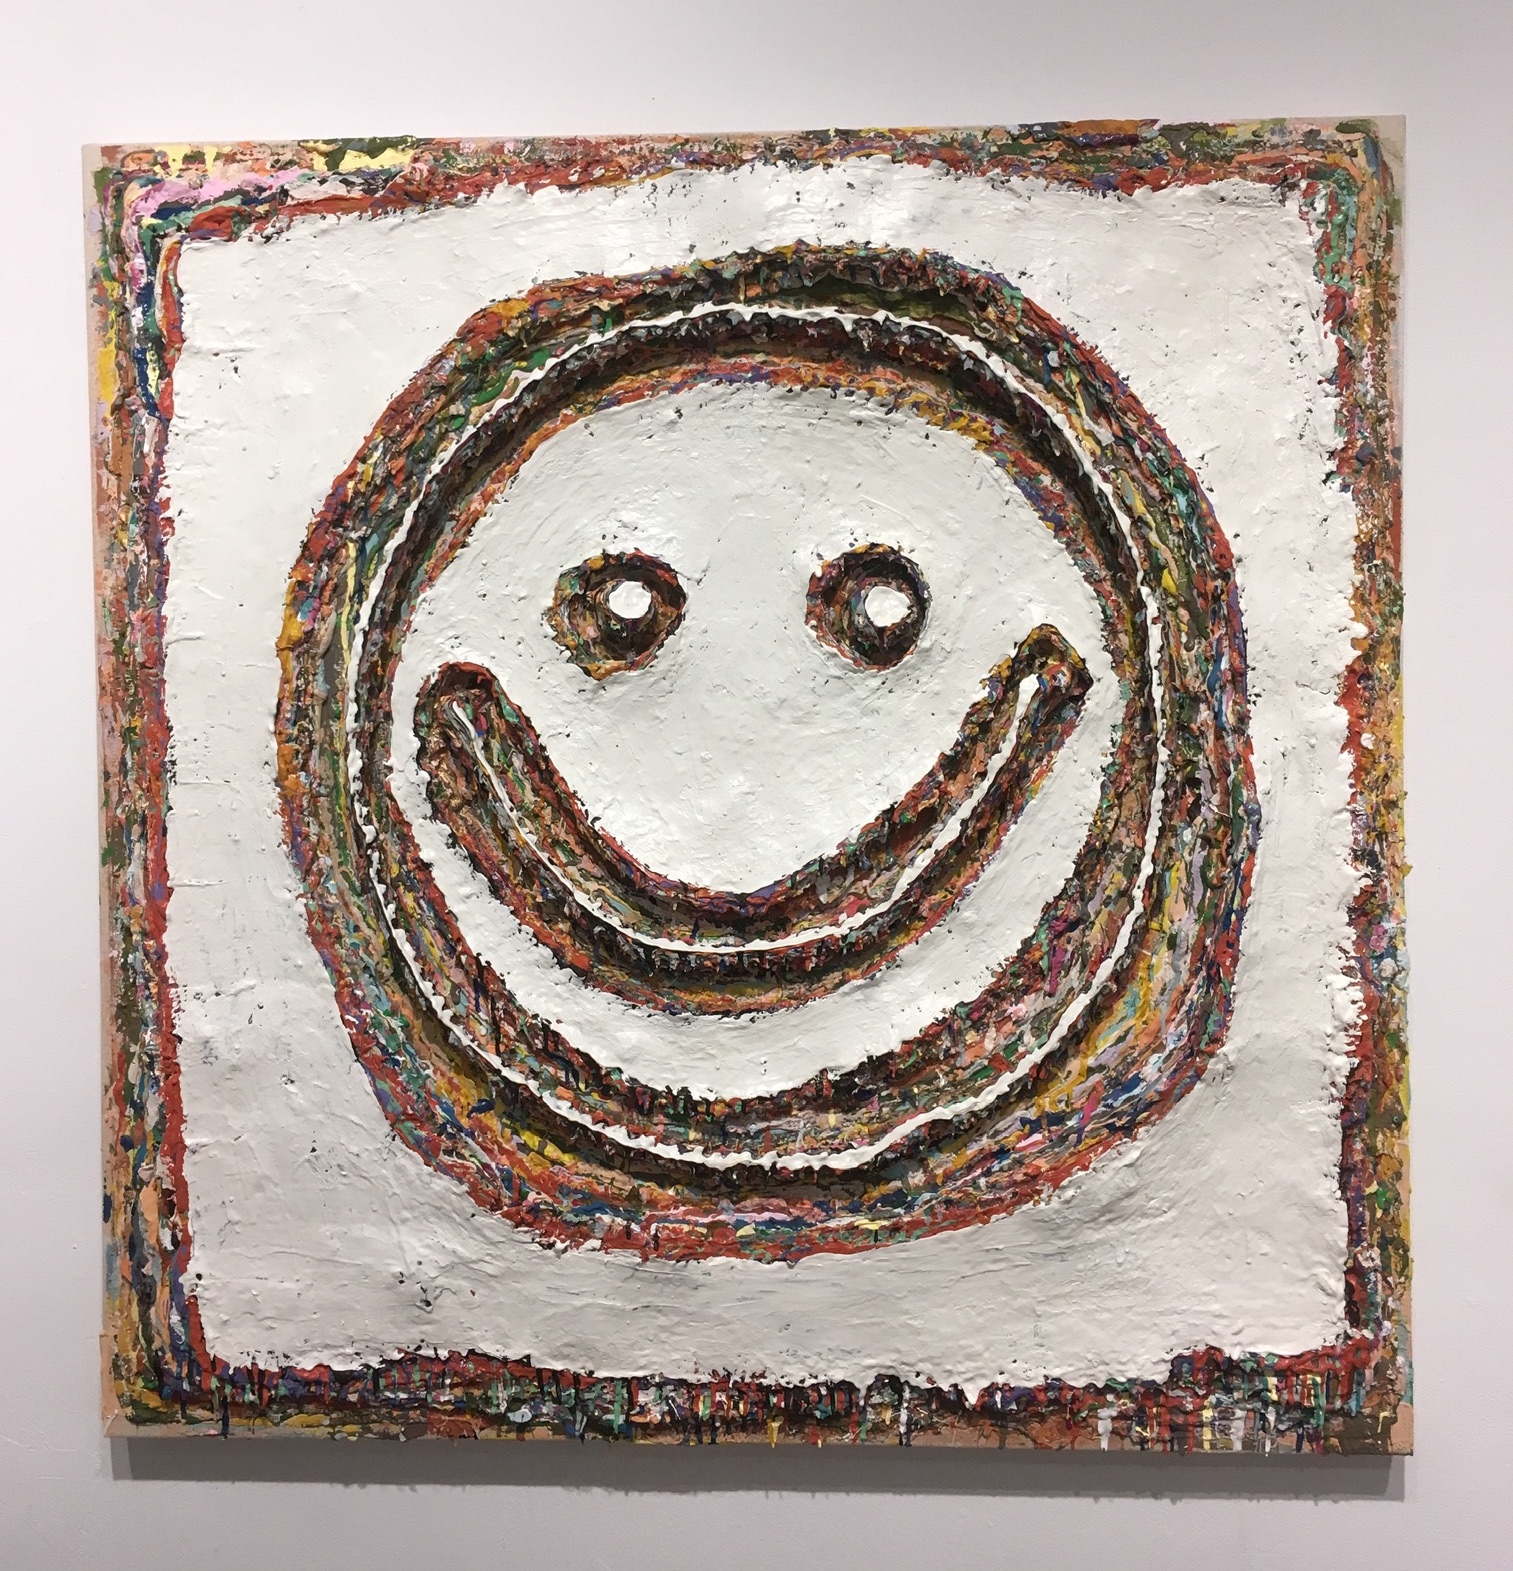 100 Layers #3 - Smiley Face